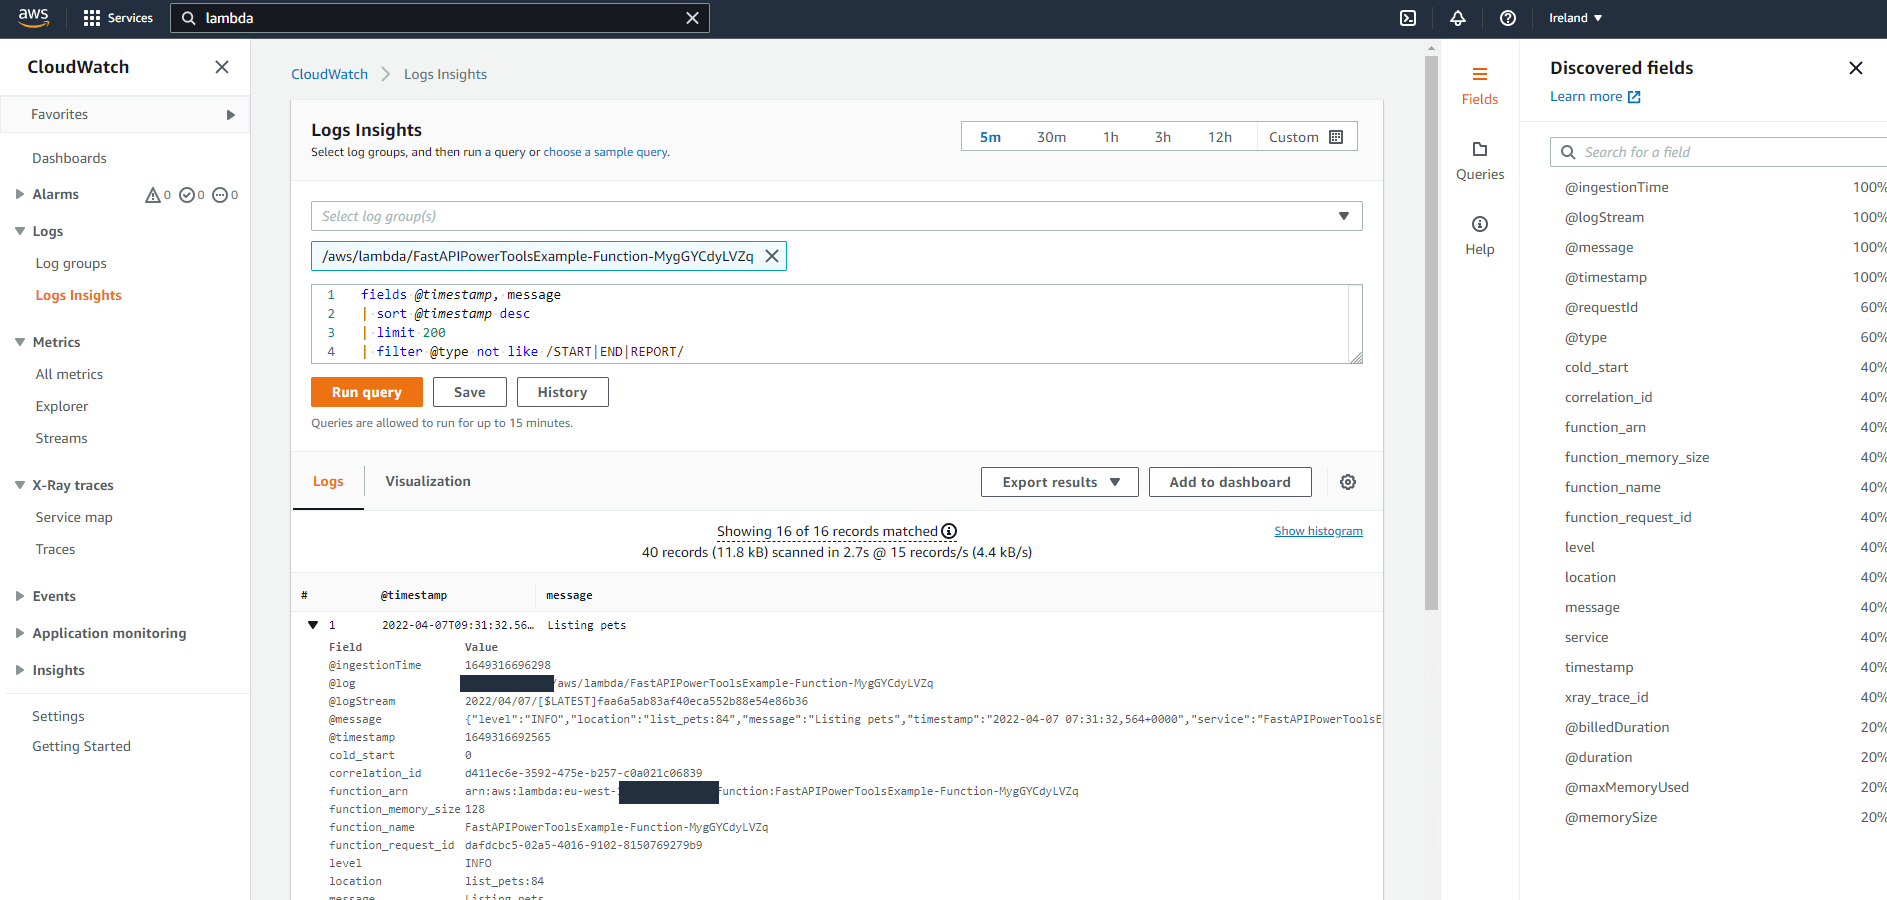 CloudWatch logs with correlation ID